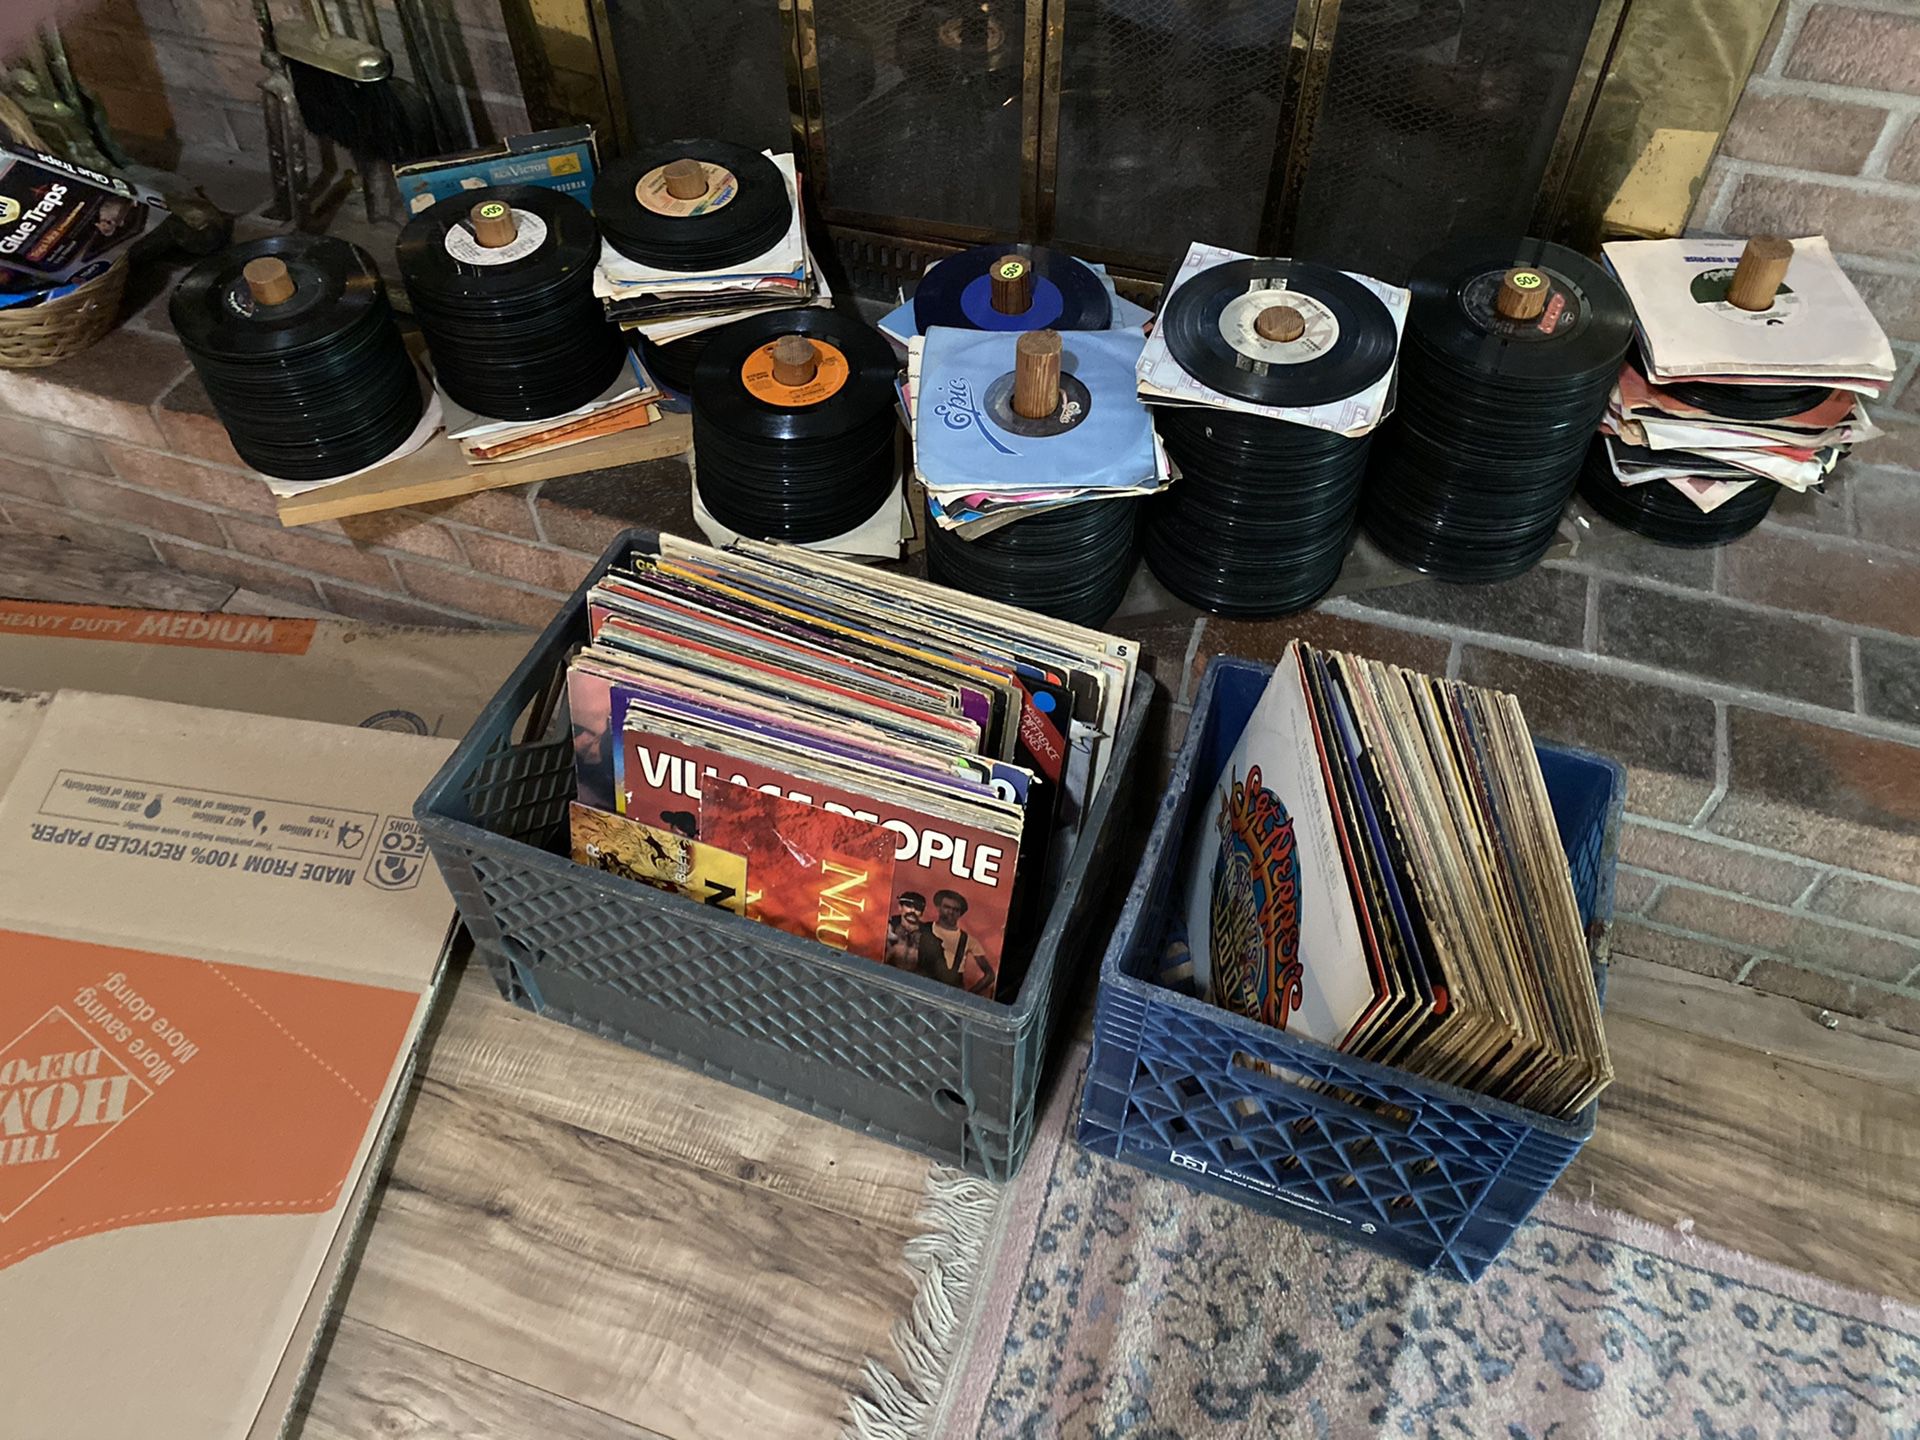 Records(45) and albums